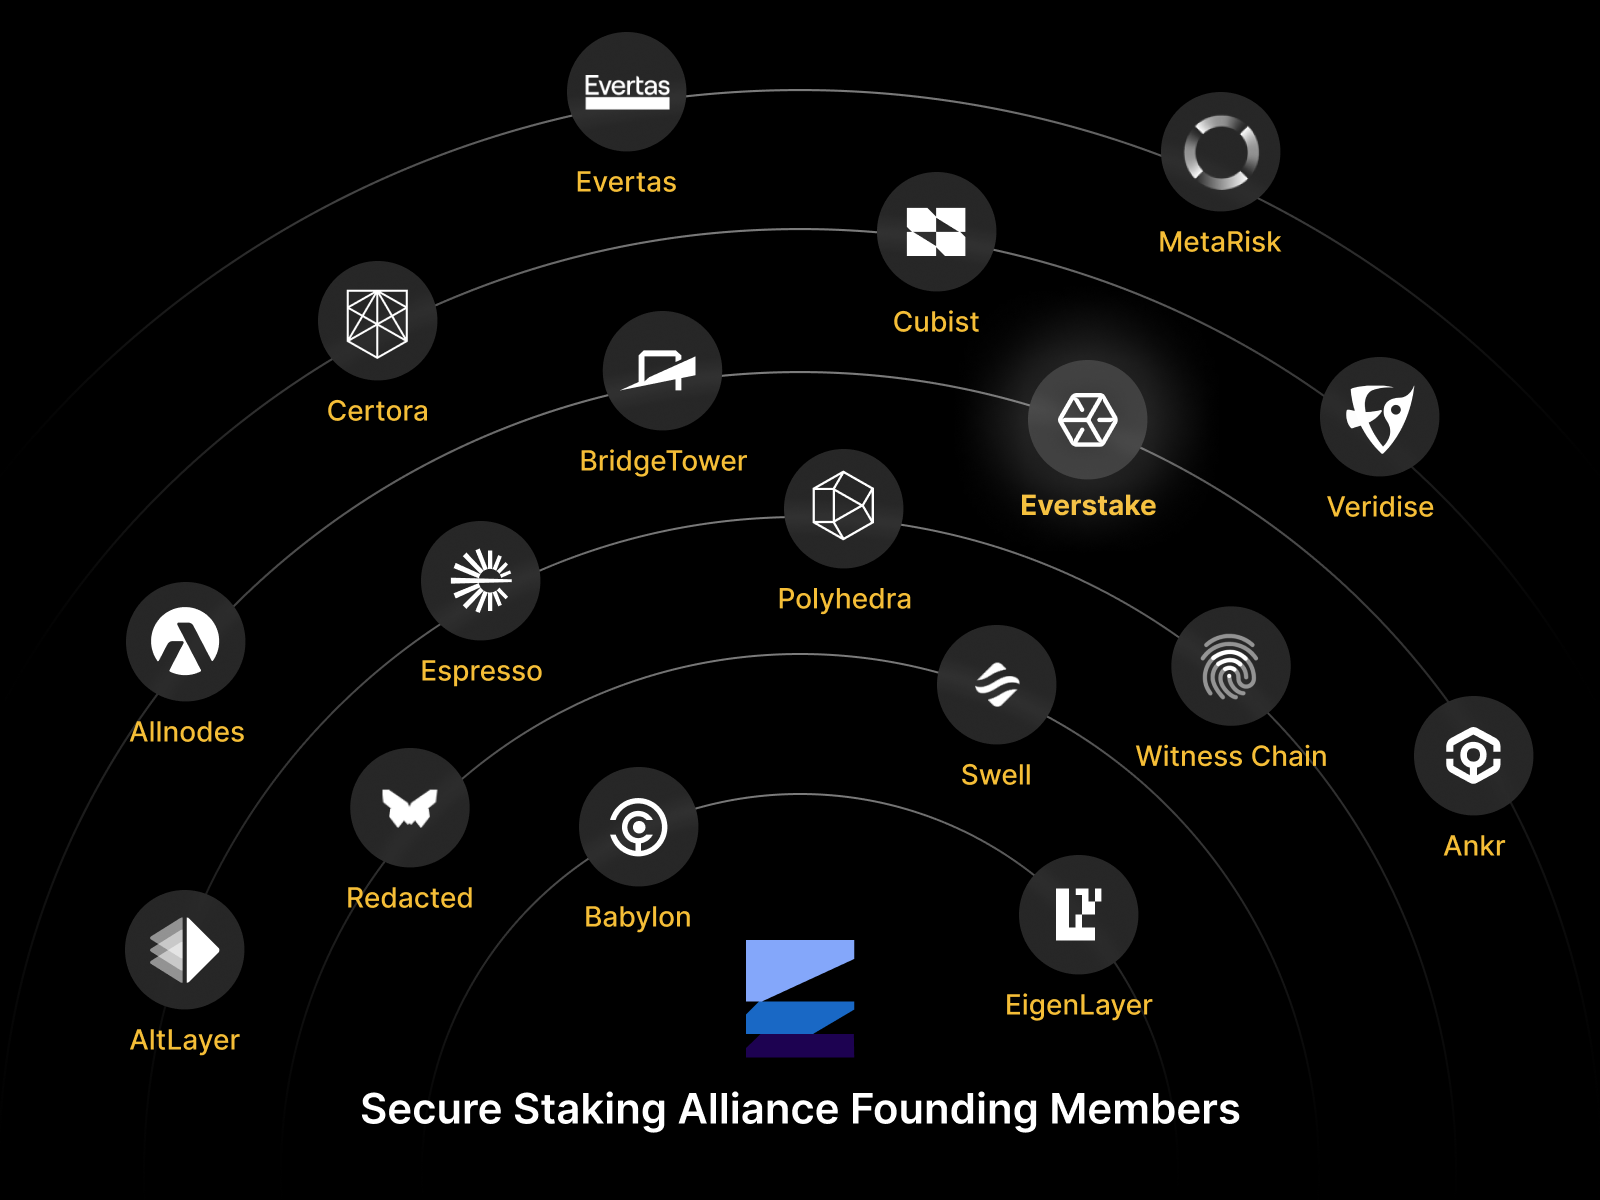 The Secure Staking Alliance Founding Members